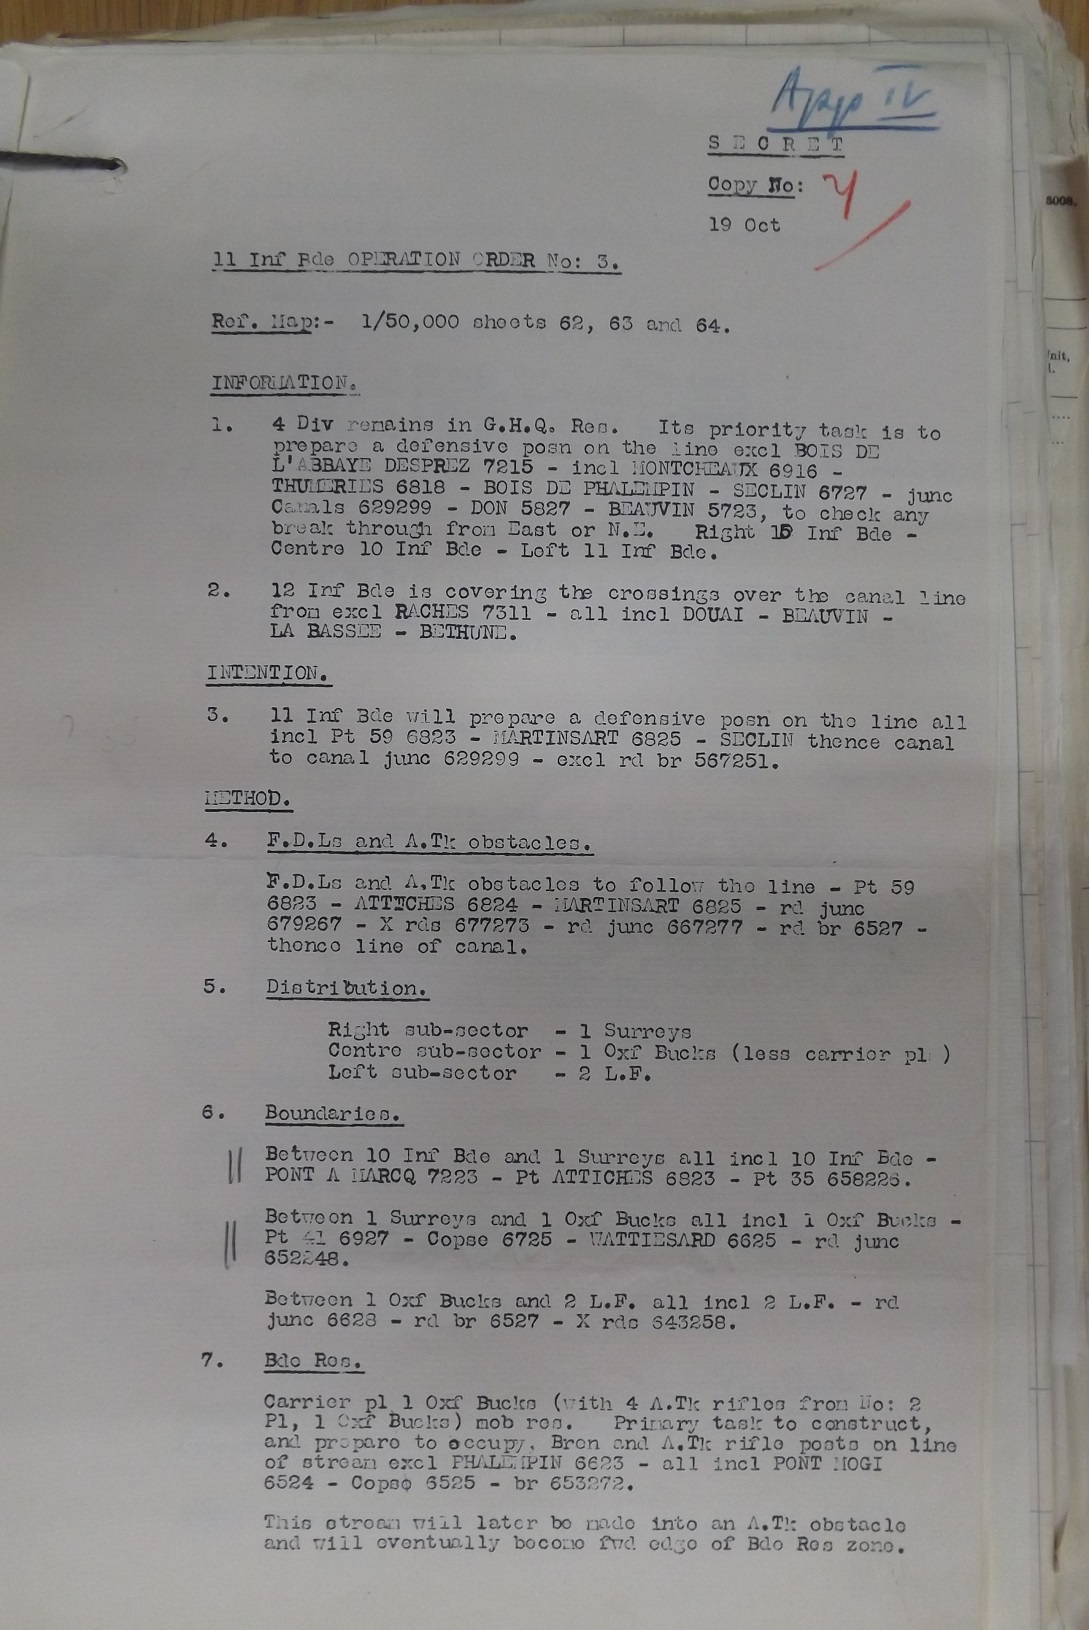 11 Inf Bde Operation Order No 3 19 Oct 1939